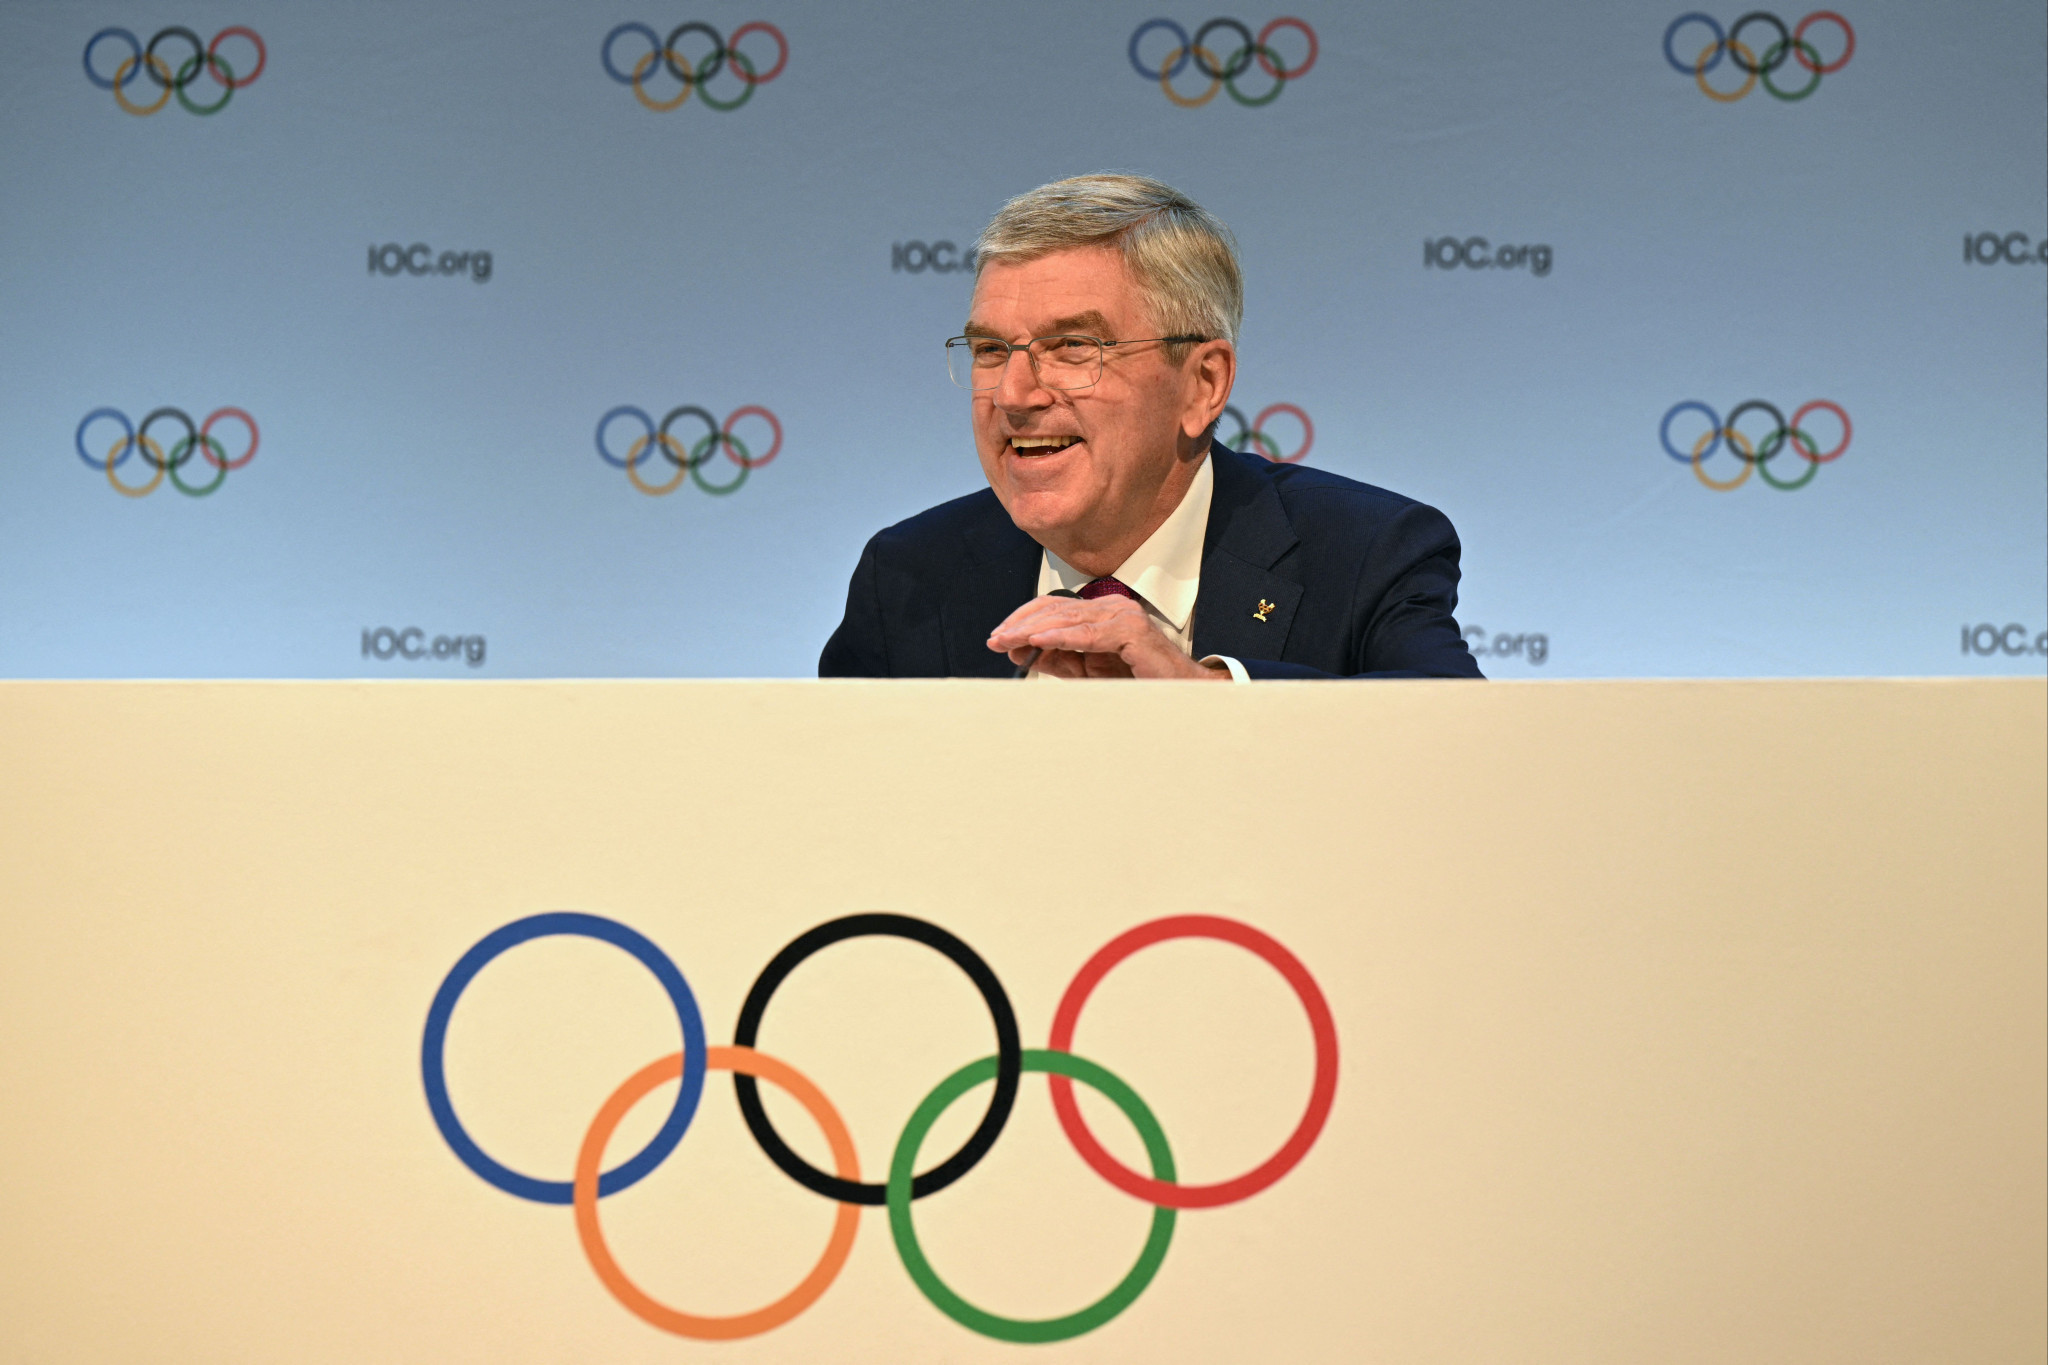 Bach supports term limits but refuses to rule out Olympic Charter amendment to continue as IOC President